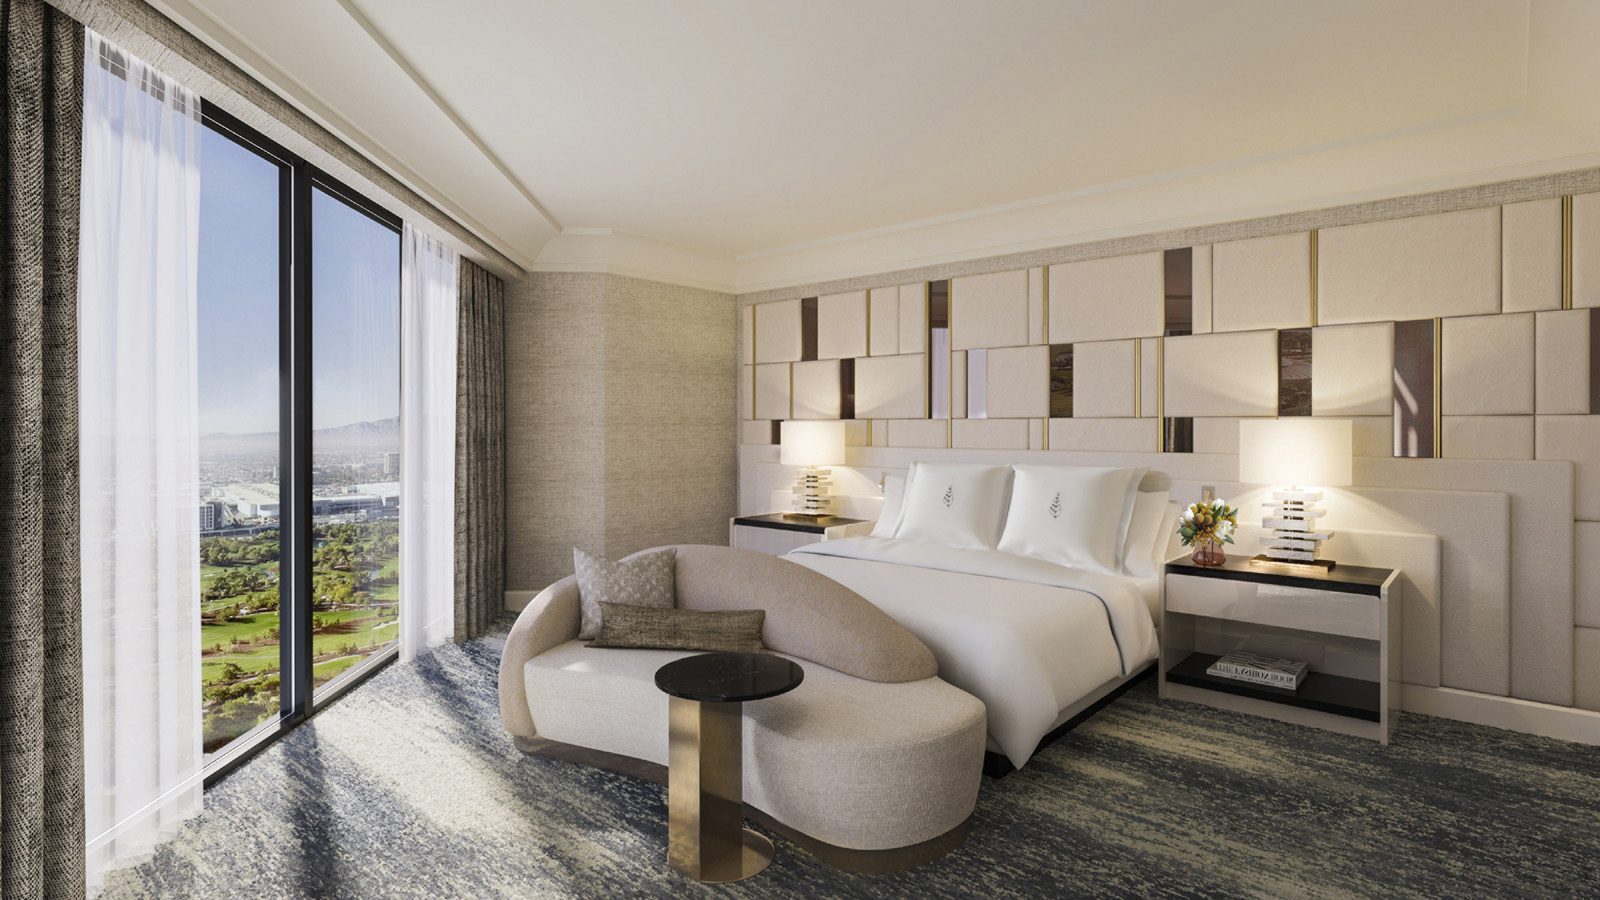 The Four Seasons Hotel Las Vegas has completed the first phase of a redesign to 409 of the propertys 424 guestrooms and su